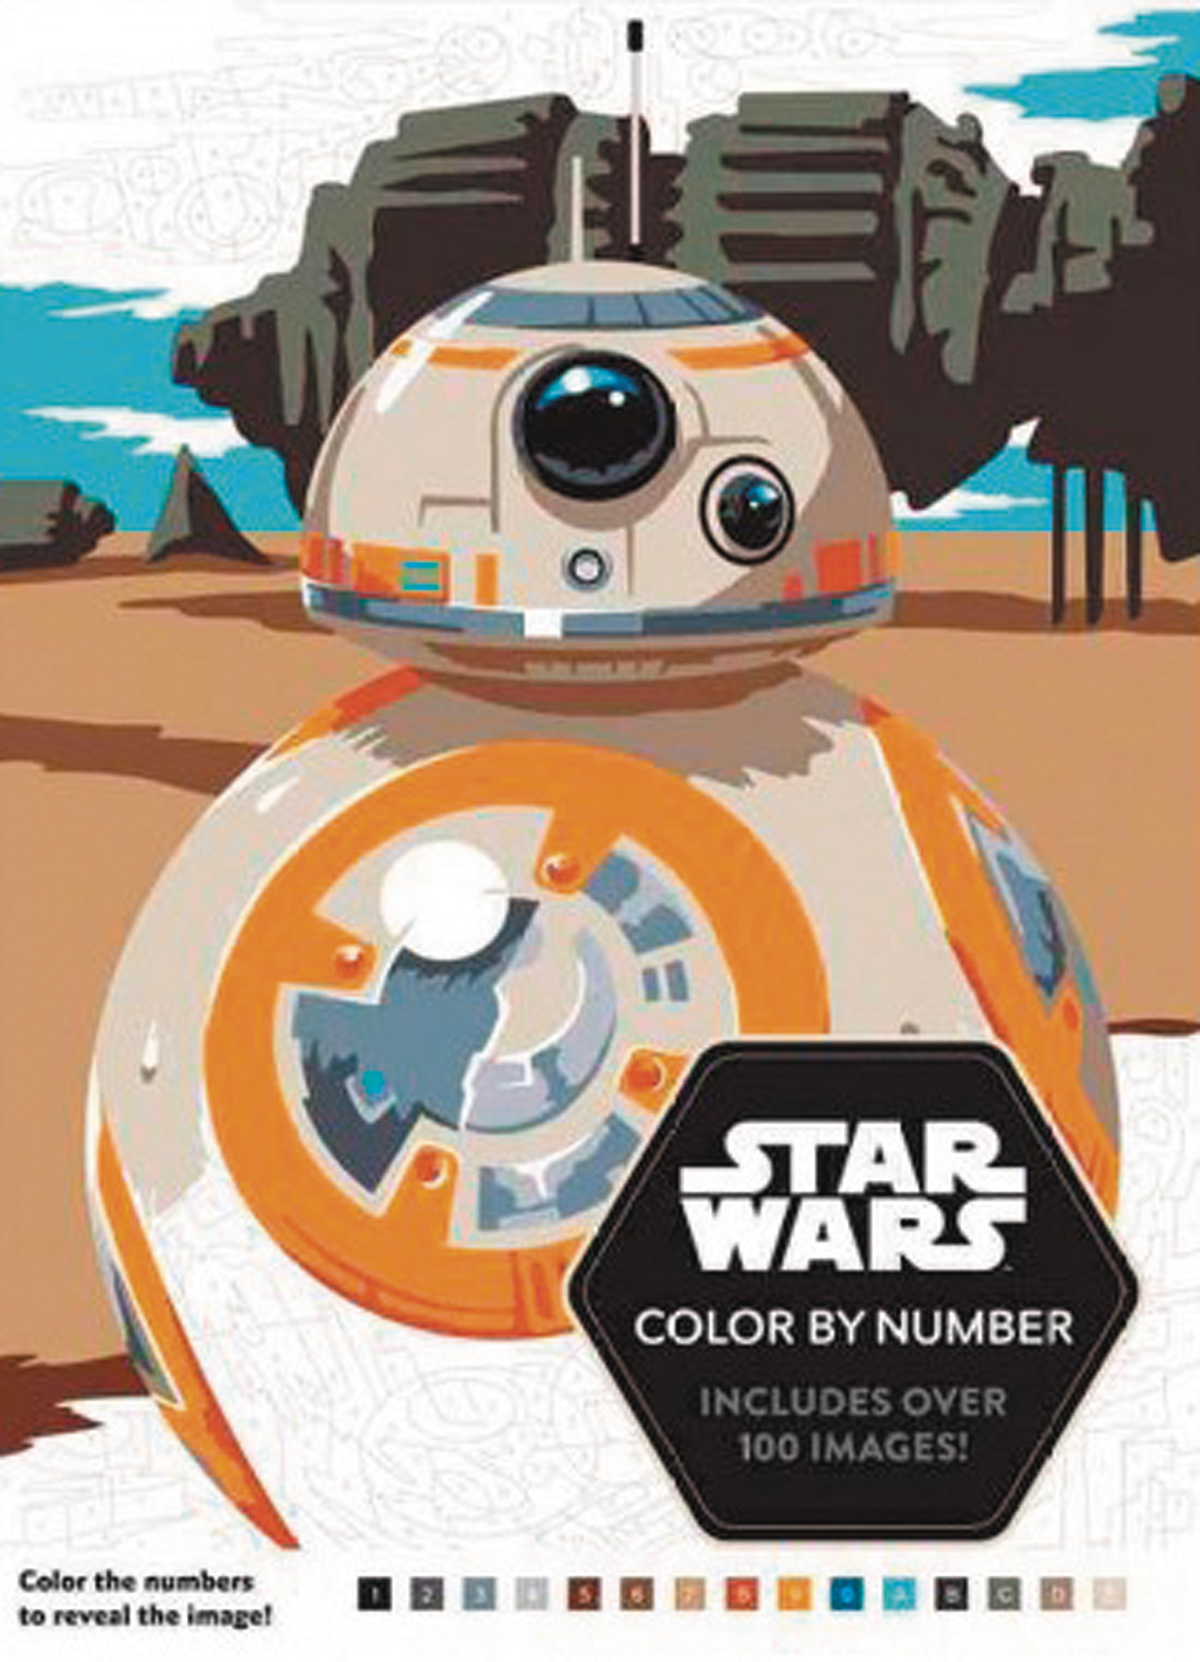 STAR WARS COLOR BY NUMBER